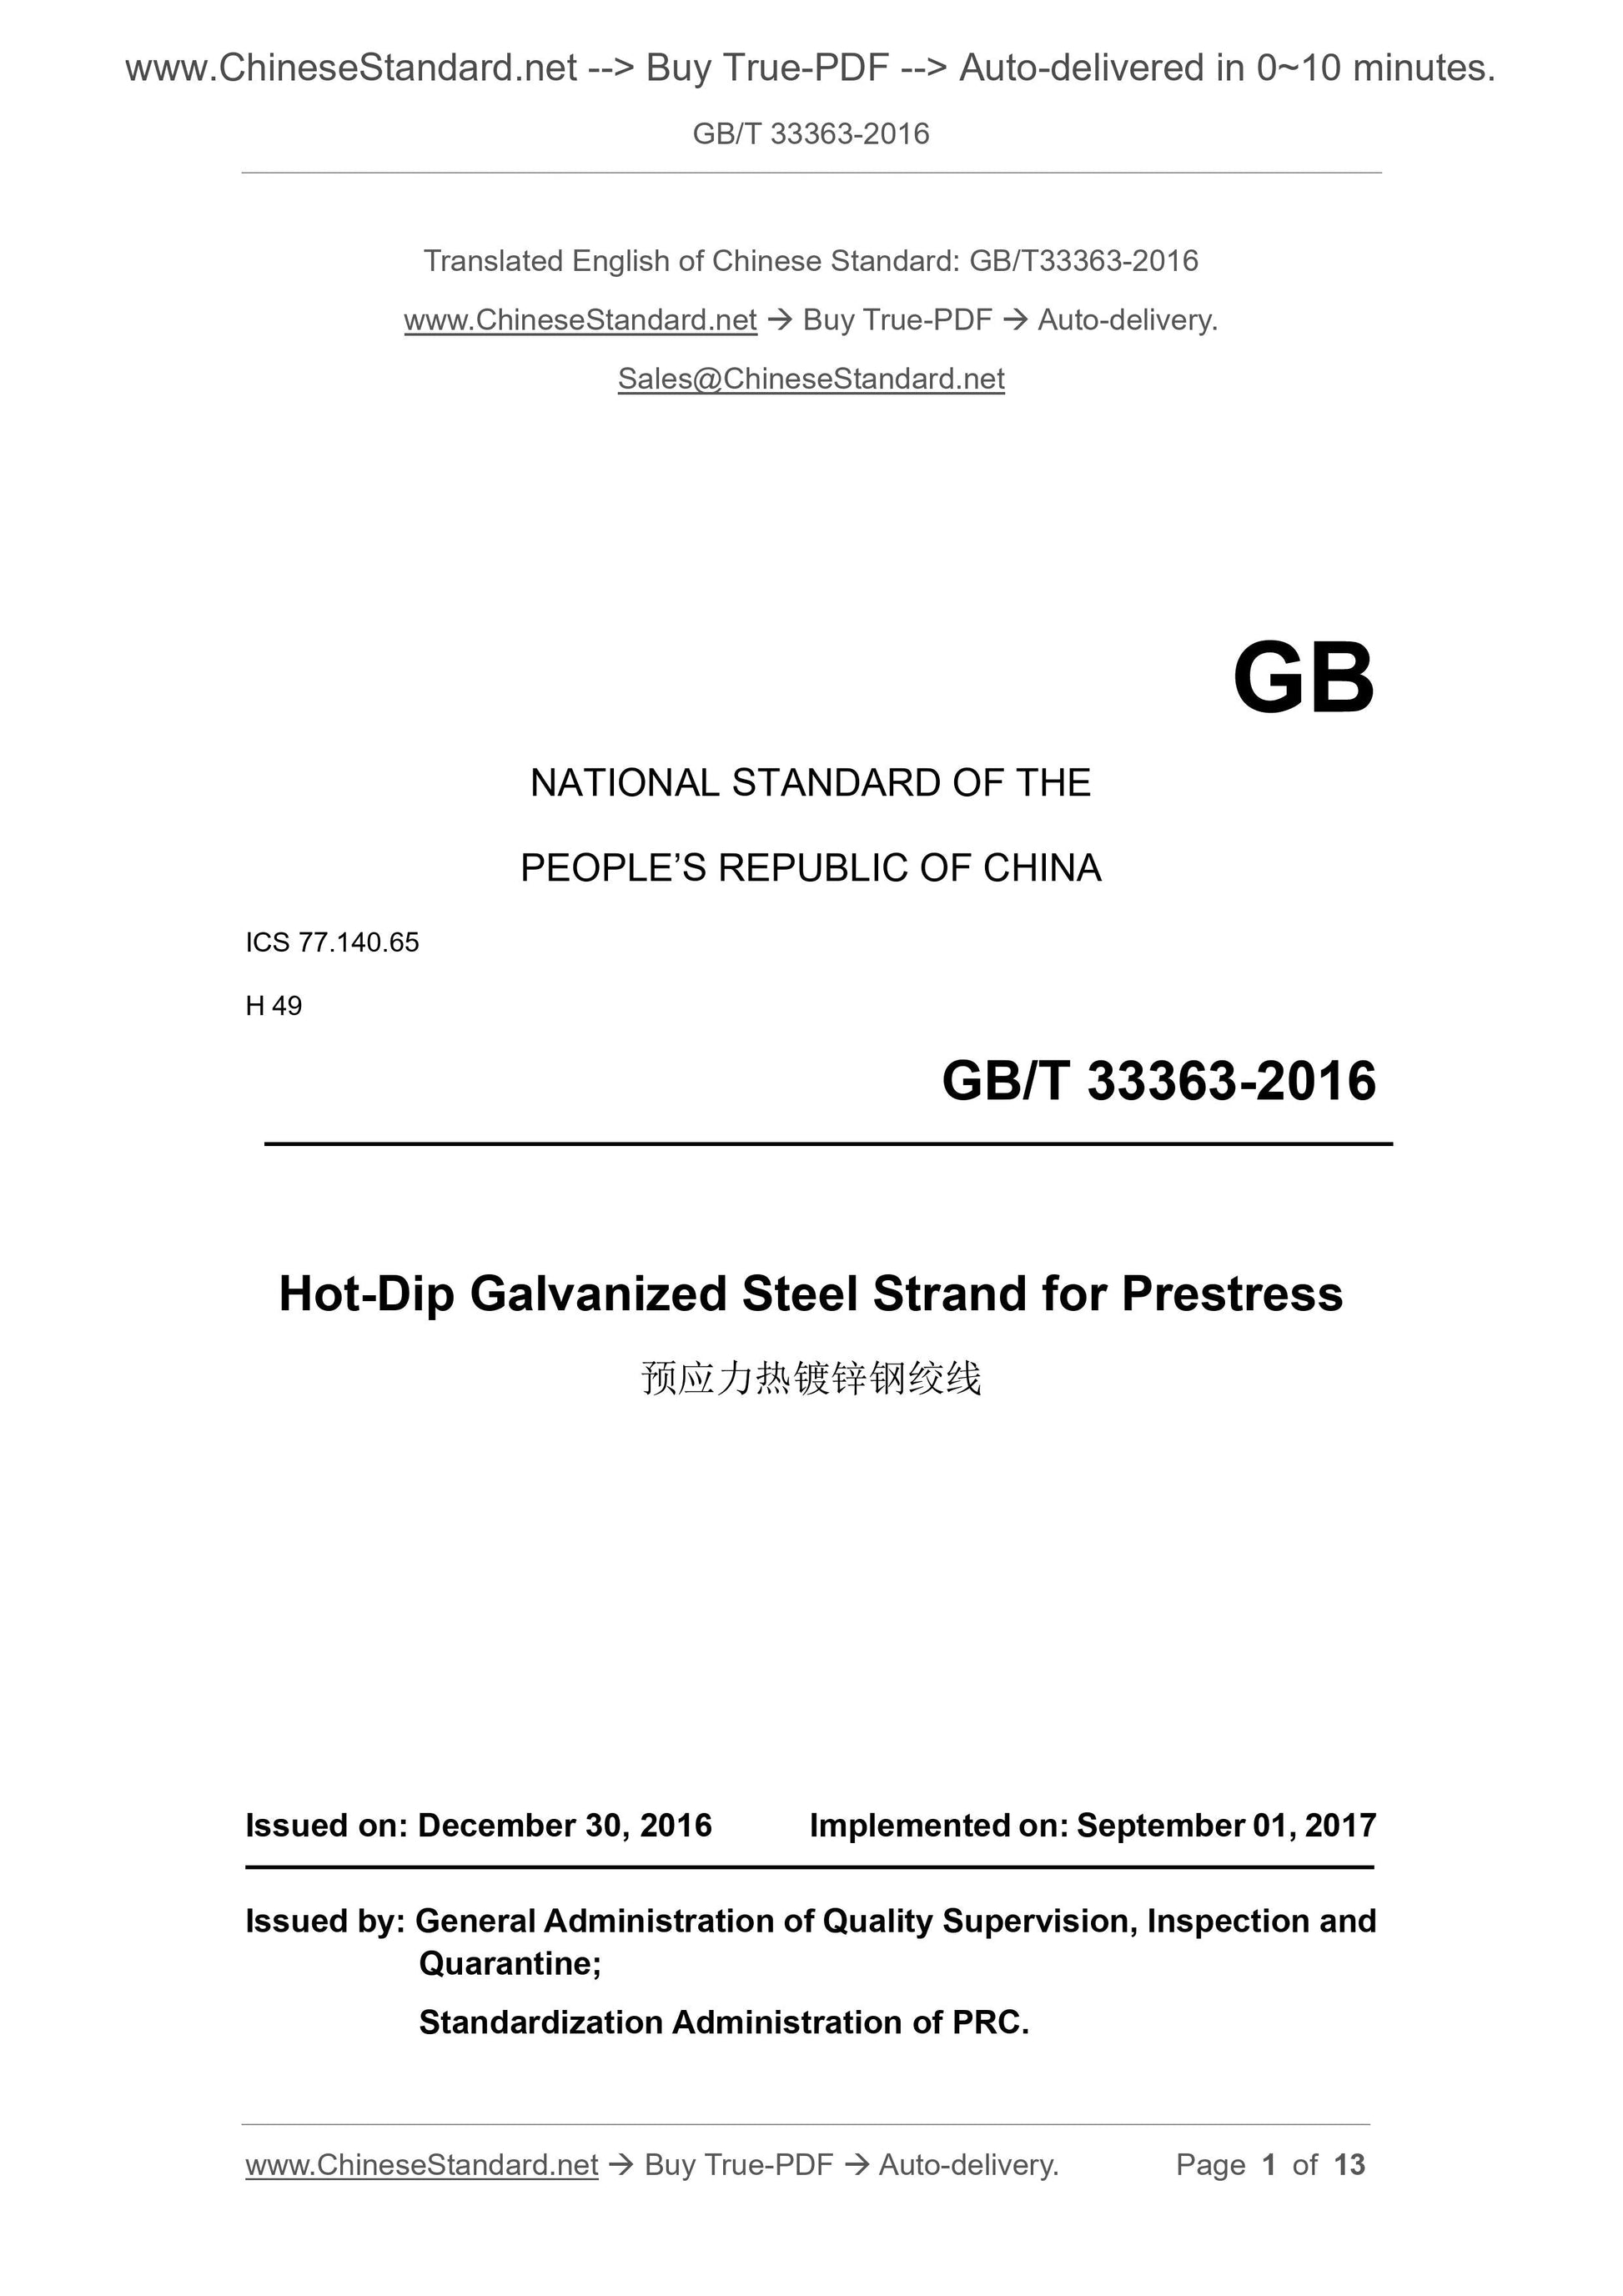 GB/T 33363-2016 Page 1